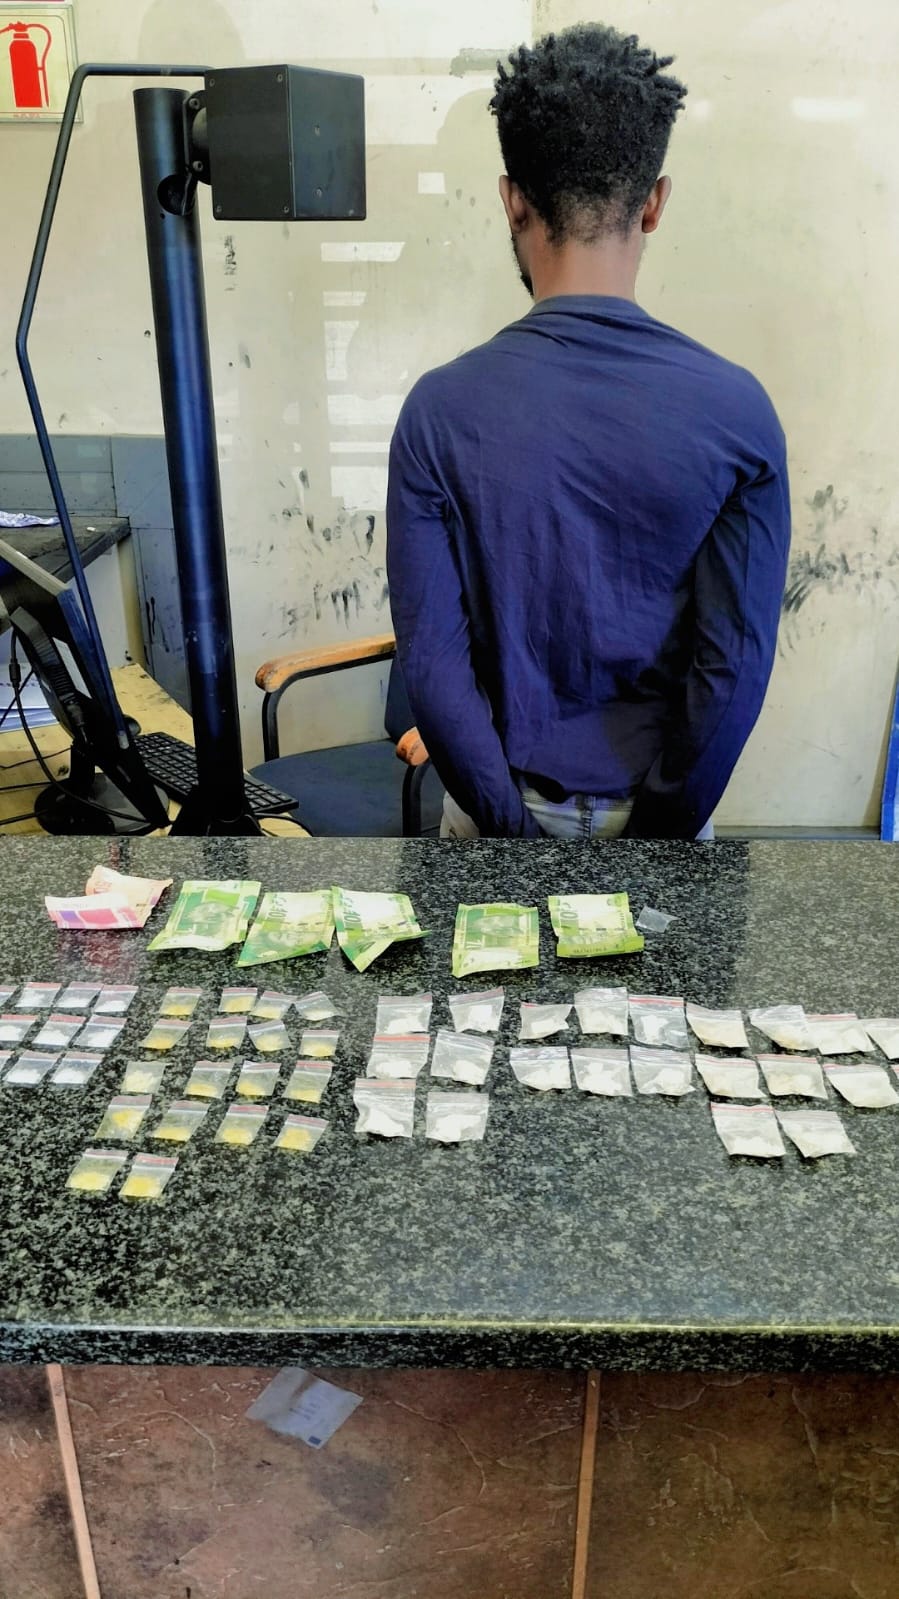 Tsakane resident arrested and narcotics seized